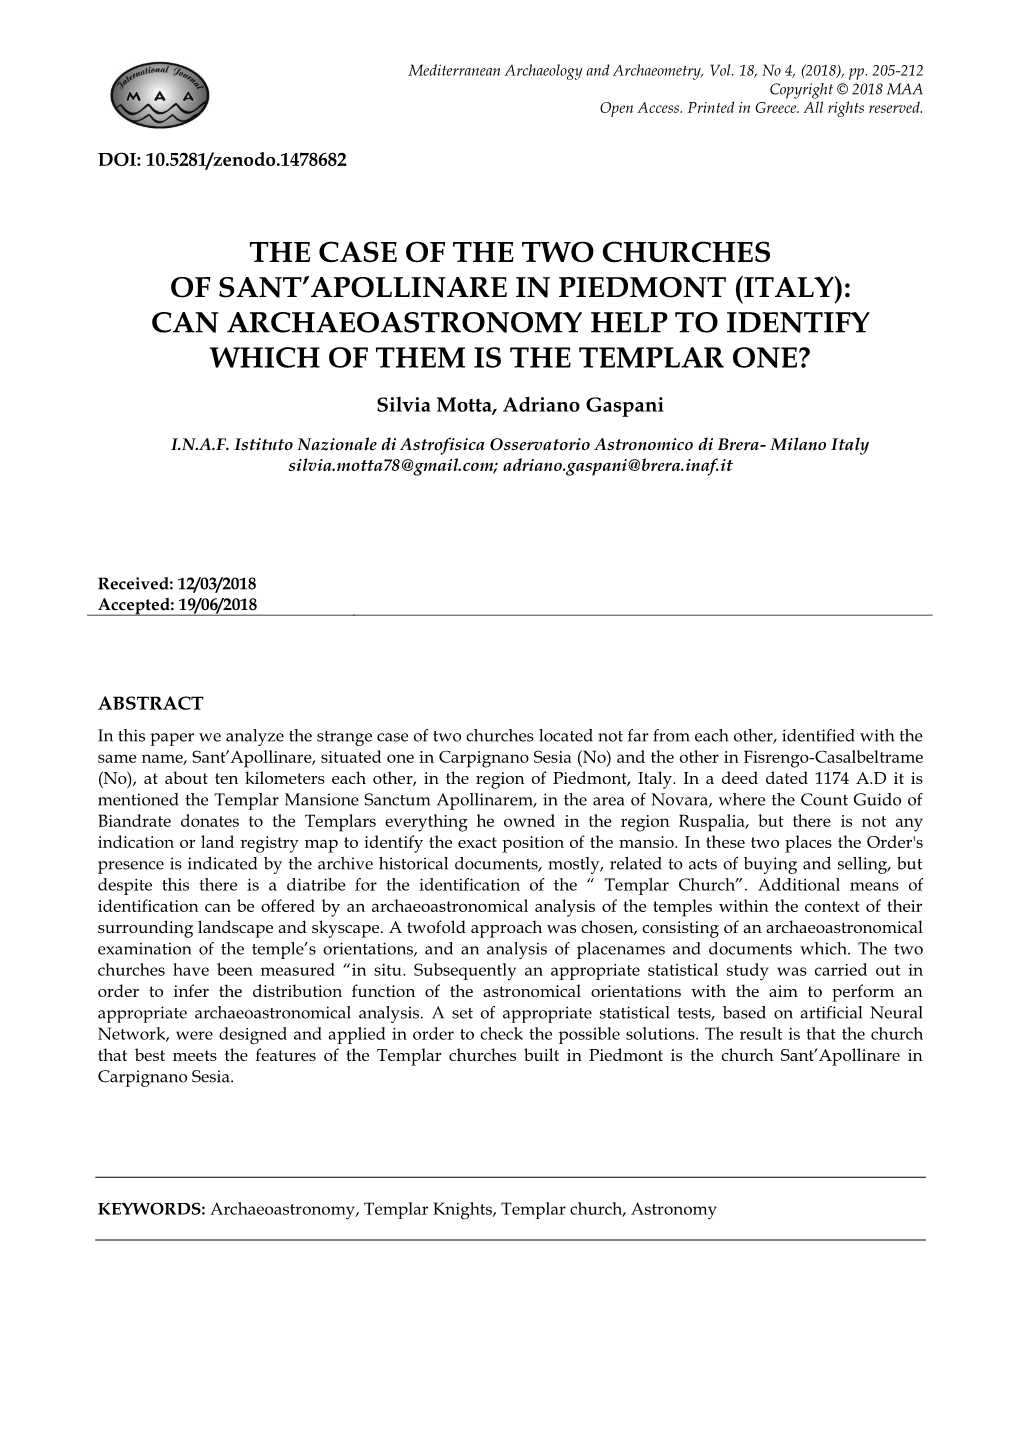 The Case of the Two Churches of Sant'apollinare In